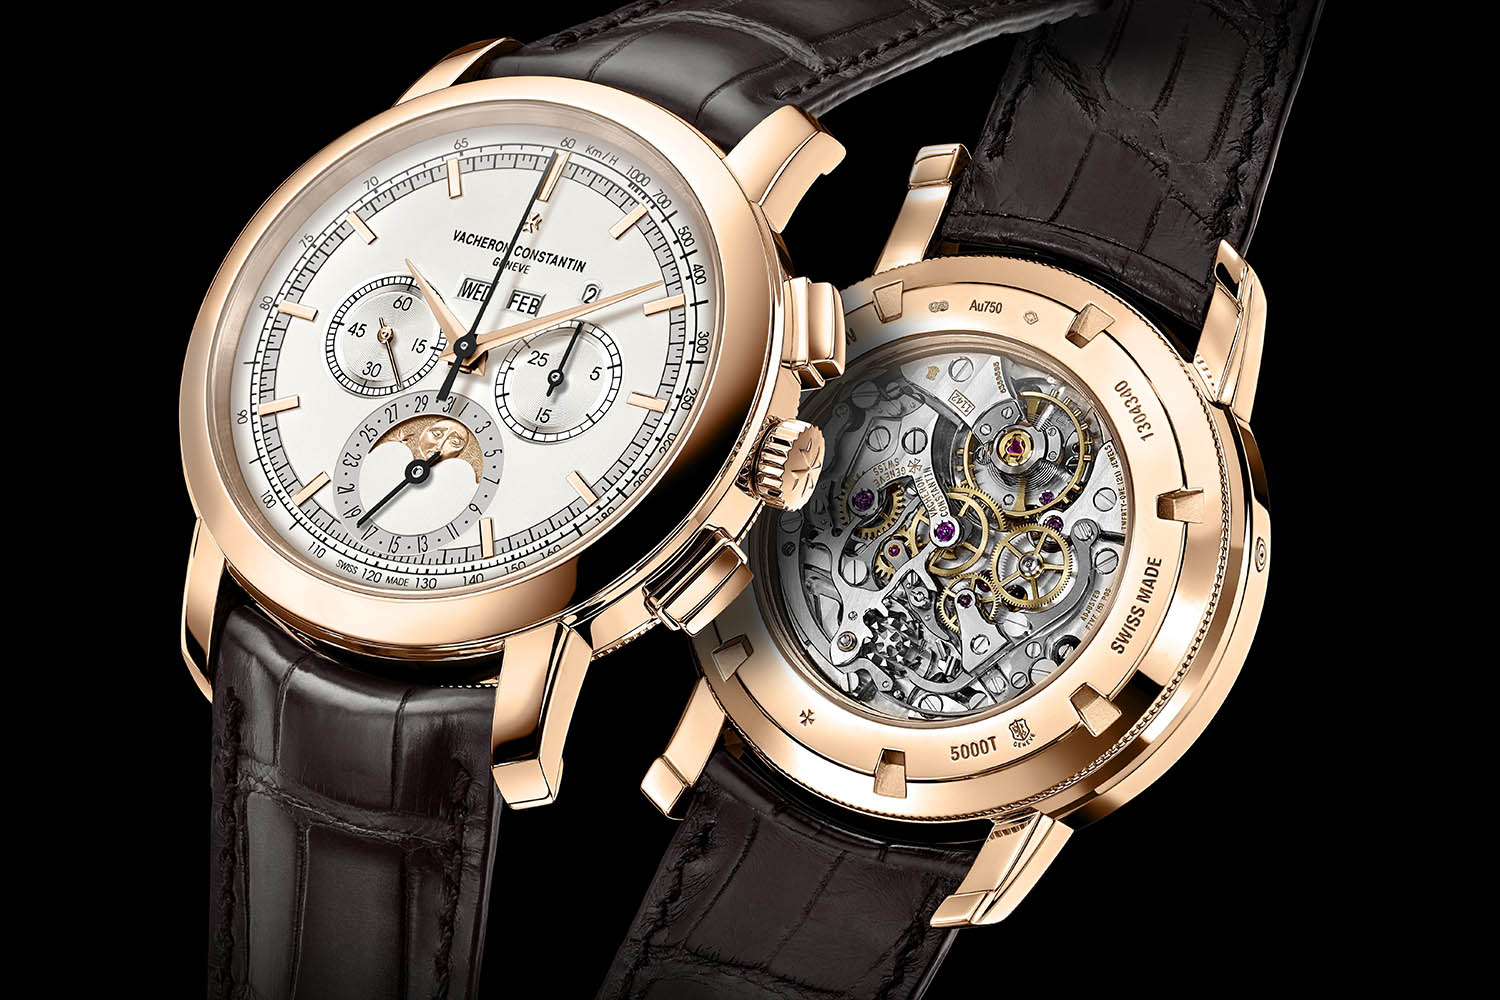 Vacheron Constantin Traditionnelle Chronograph Perpetual Calendar now in Rose Gold - SIHH 2017